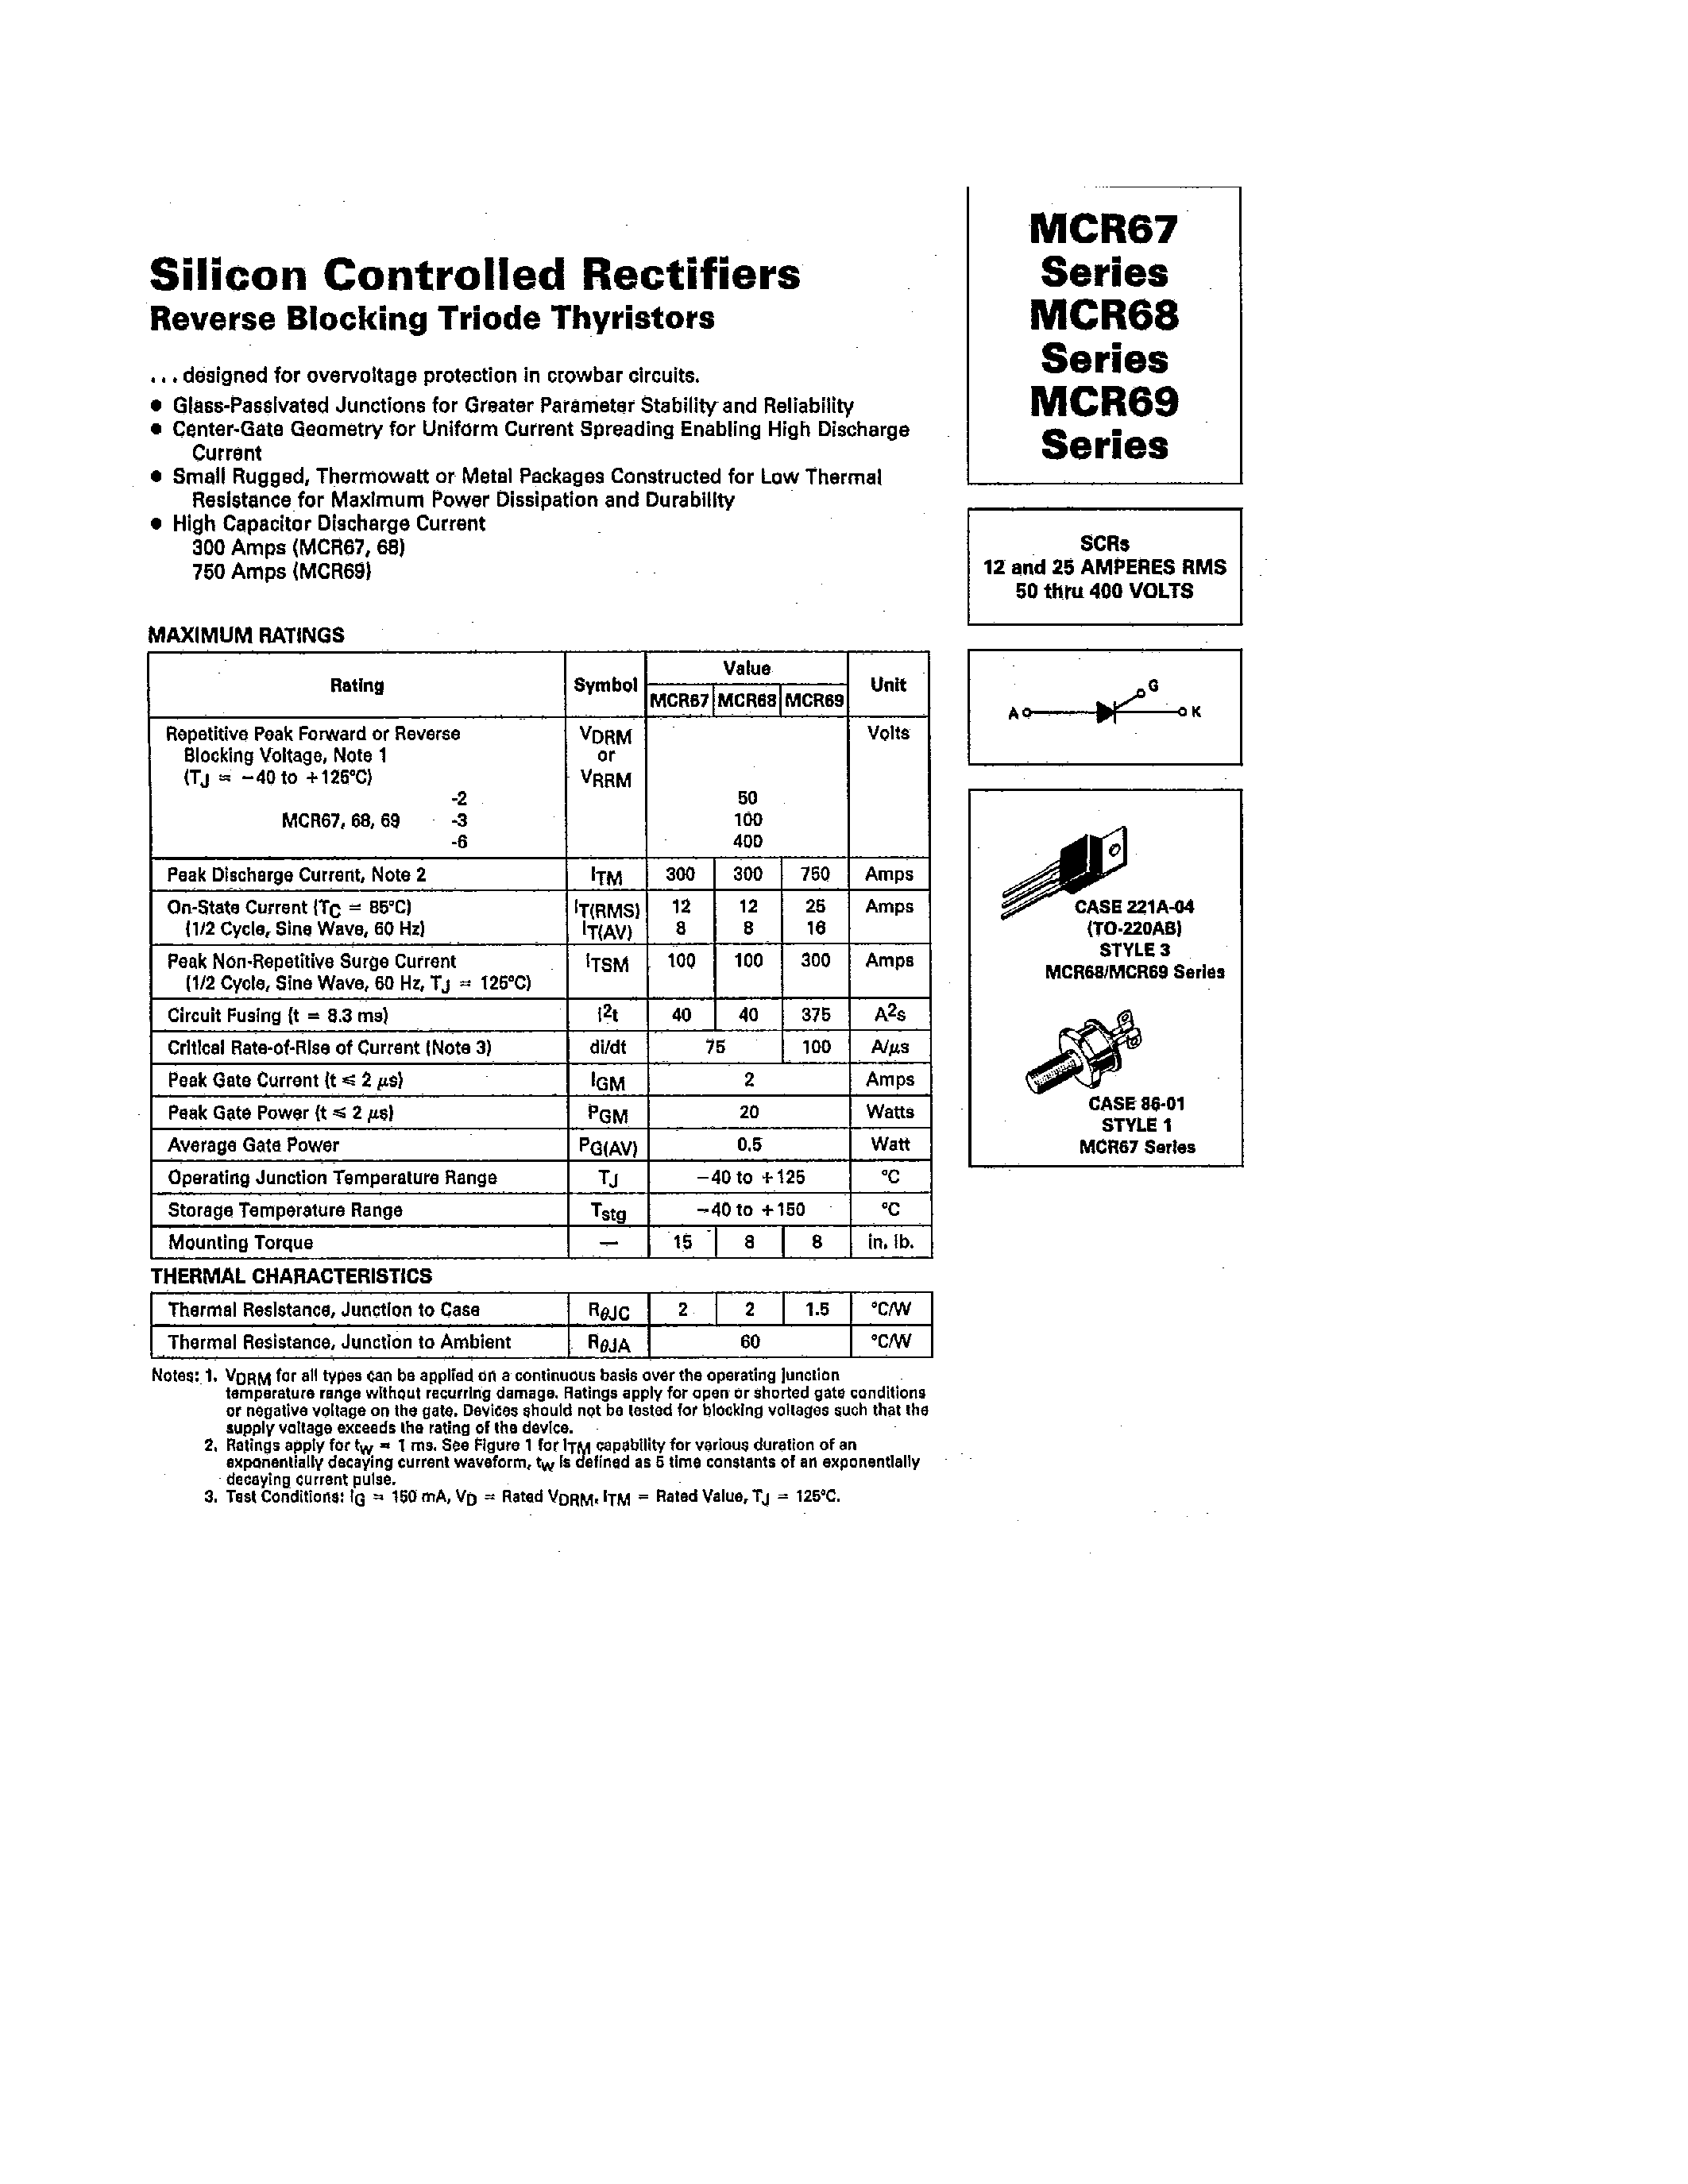 Datasheet MCR67 - (MCR67 - MCR69) SILICON CONTROLLED RECTIFIERS page 1